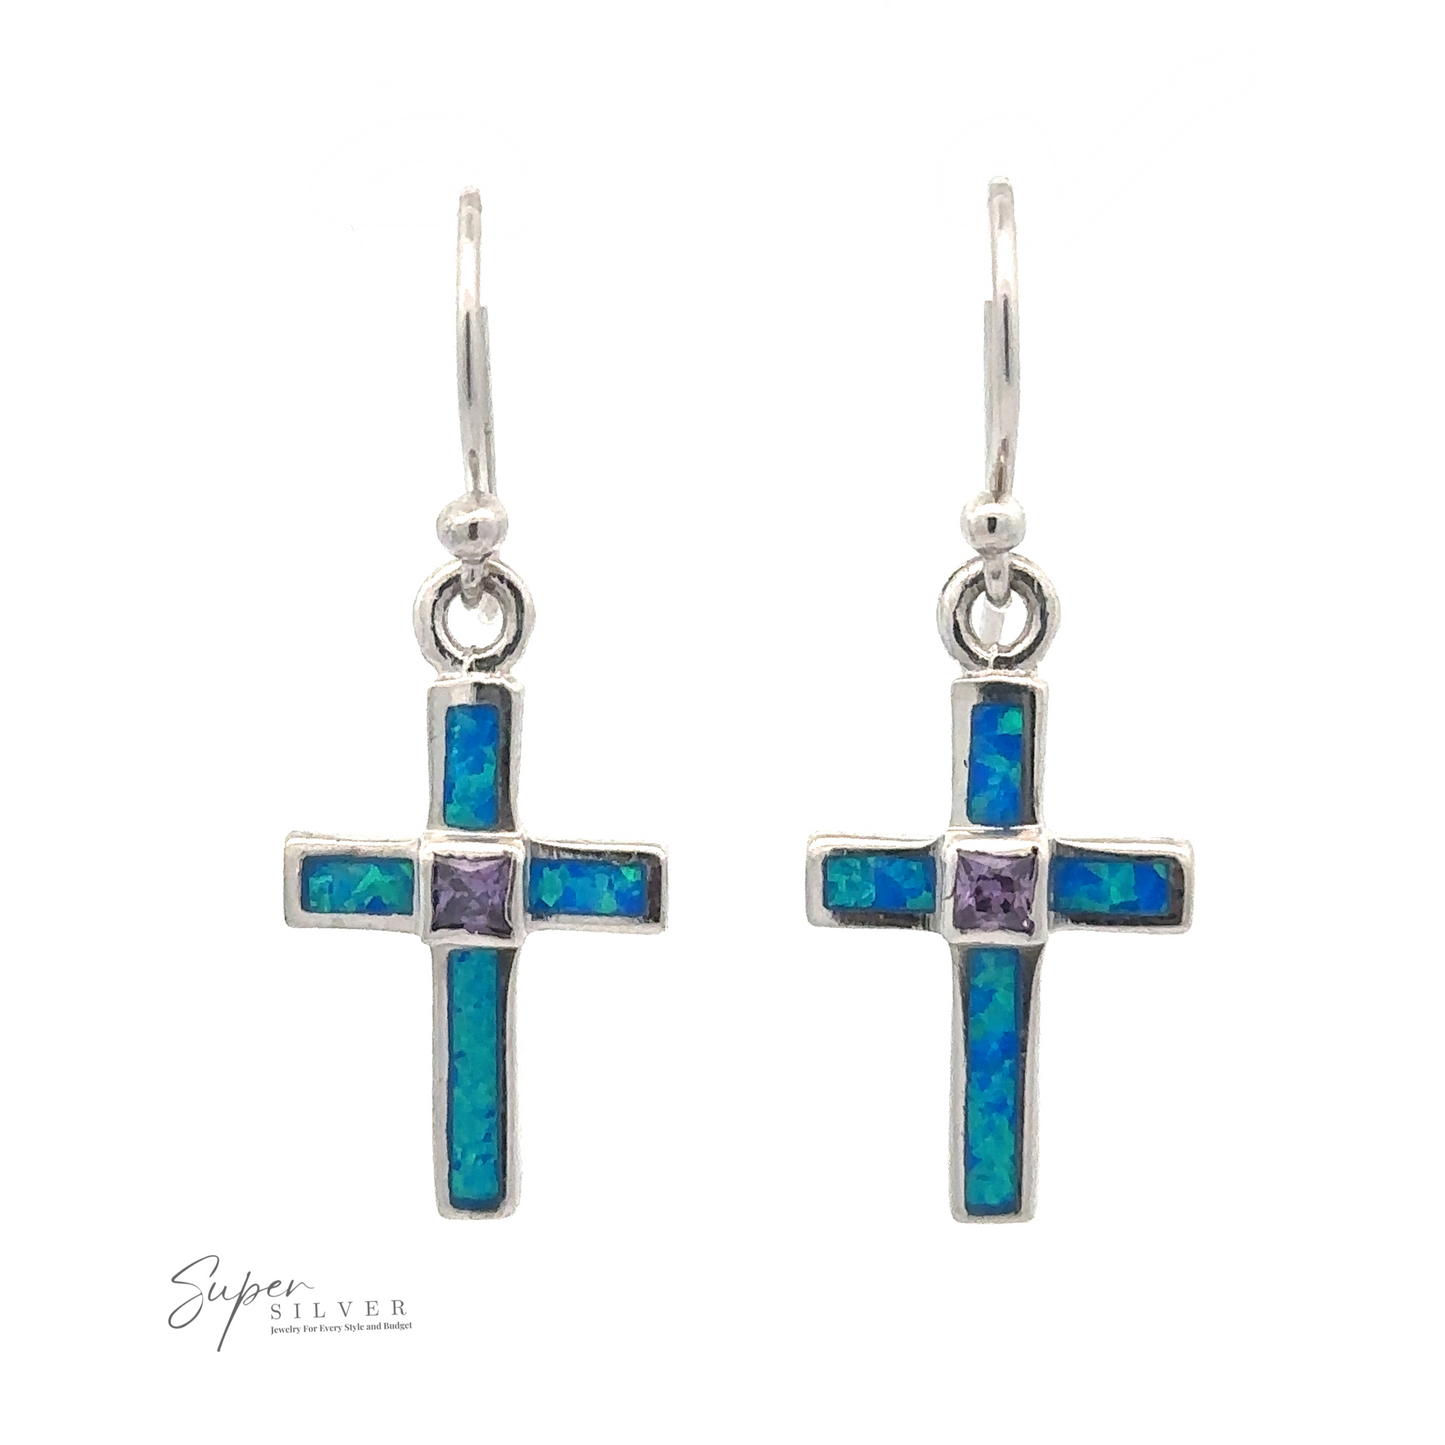 
                  
                    A pair of Blue Opal Cross Earrings With Amethyst Center Stone featuring blue and green inlaid stones with a small pink stone in the center, hanging from silver hooks. The brand "Super Silver" is visible in the bottom left corner.
                  
                